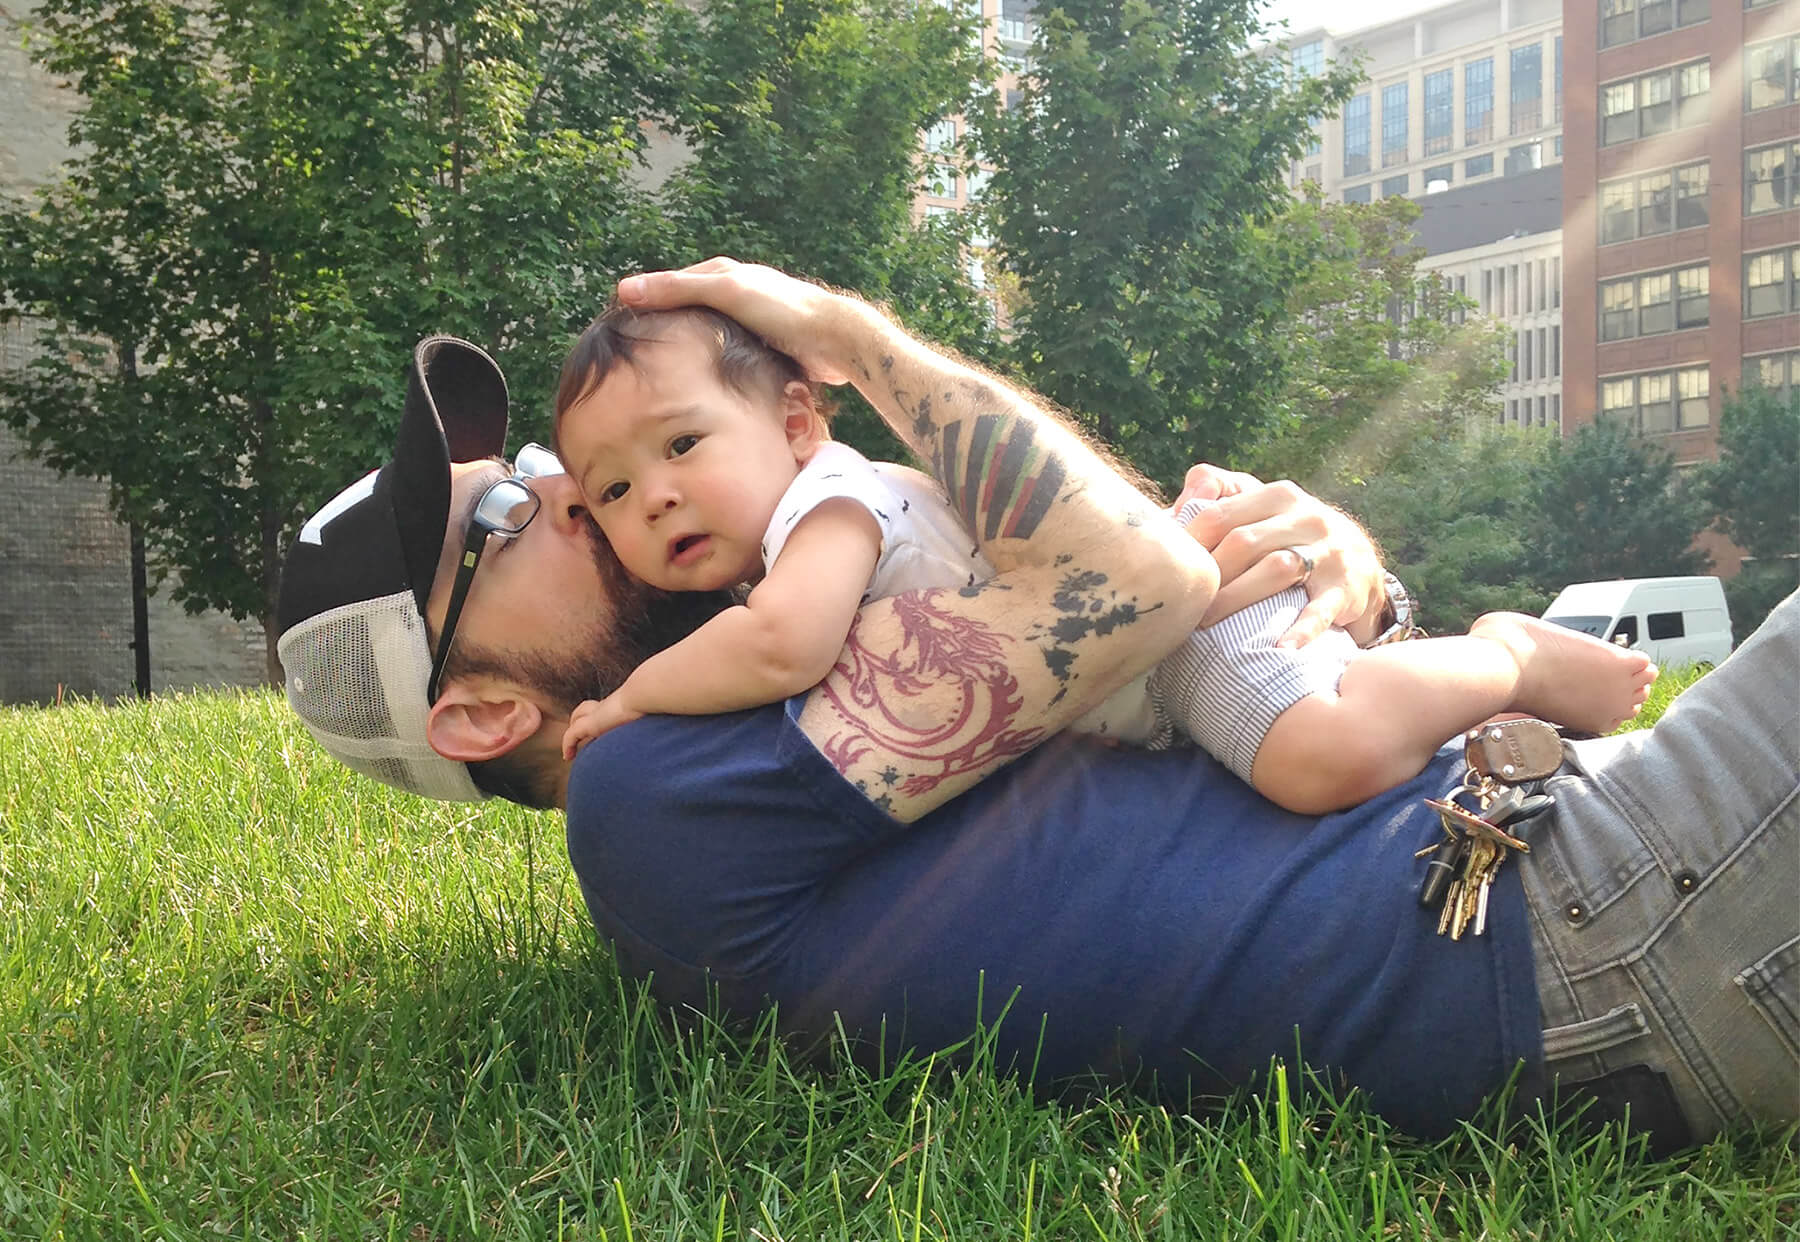 Justin on his back in the grass with his young son on his chest